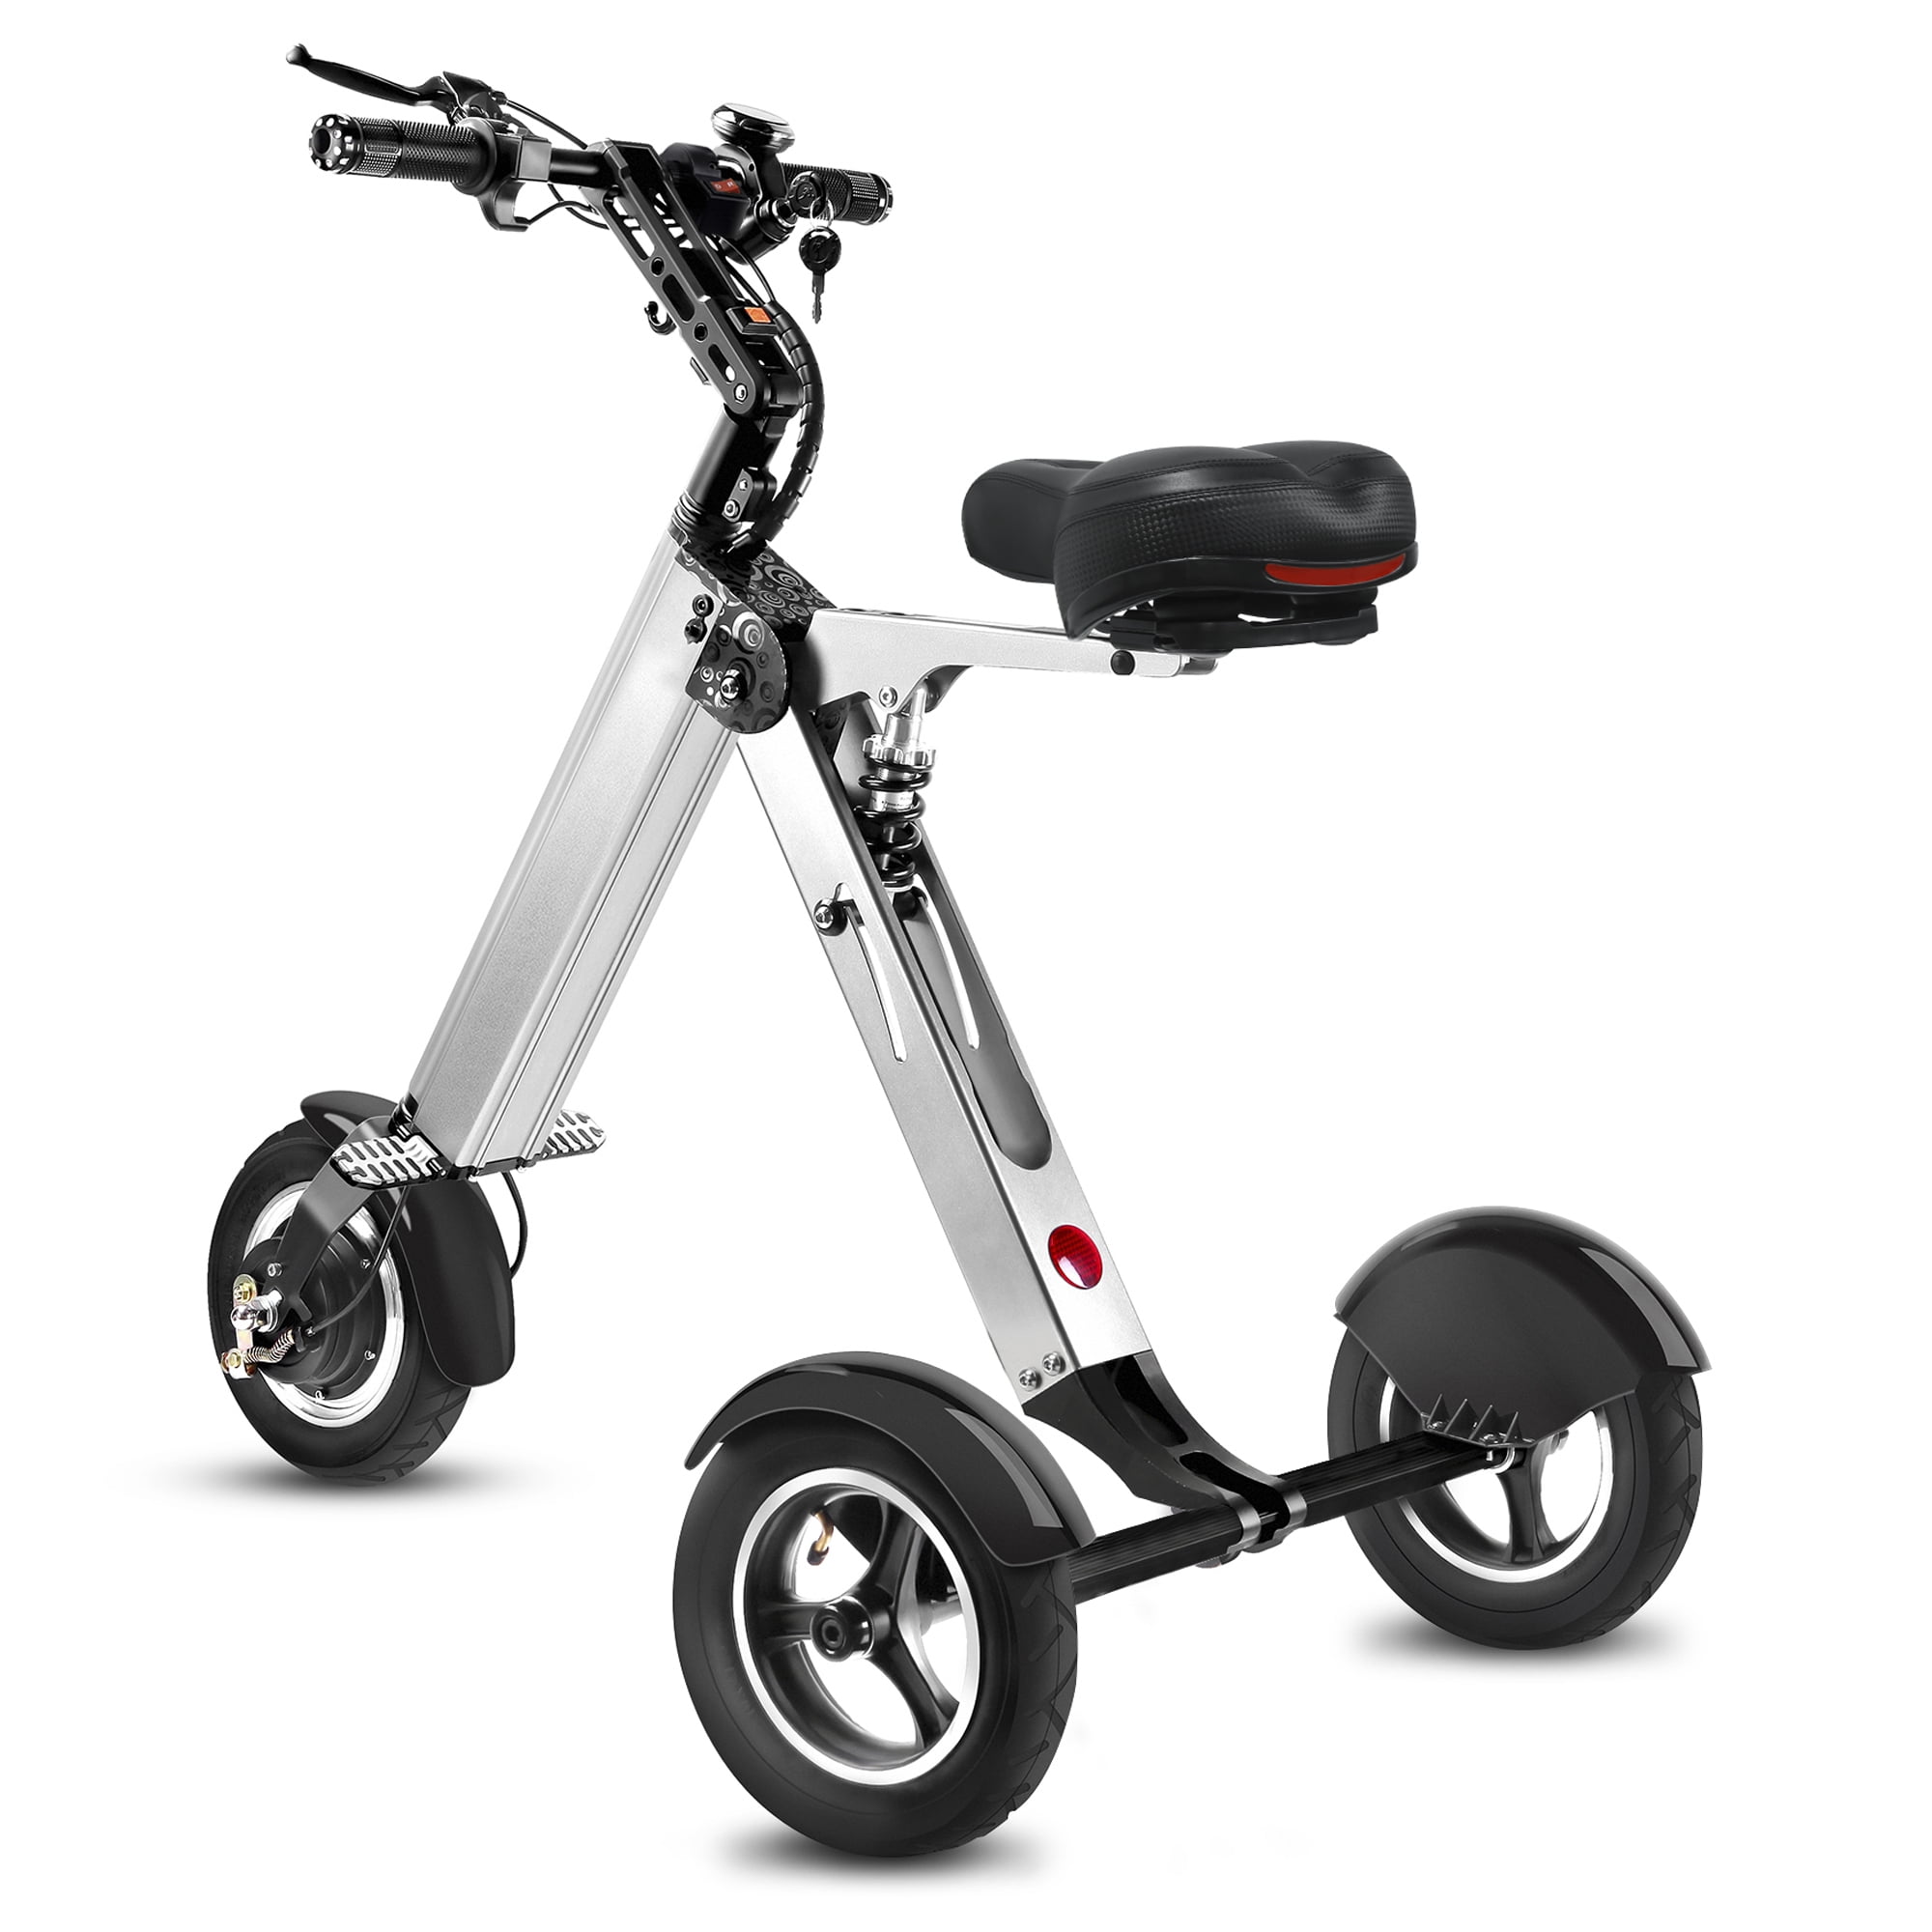 Topmate ES32 Electric Scooter Mini Tricycle for Adult, Foldable 3 Wheel  Mobility Scooter with Reverse Function, Key Switch and LED Display Electric  